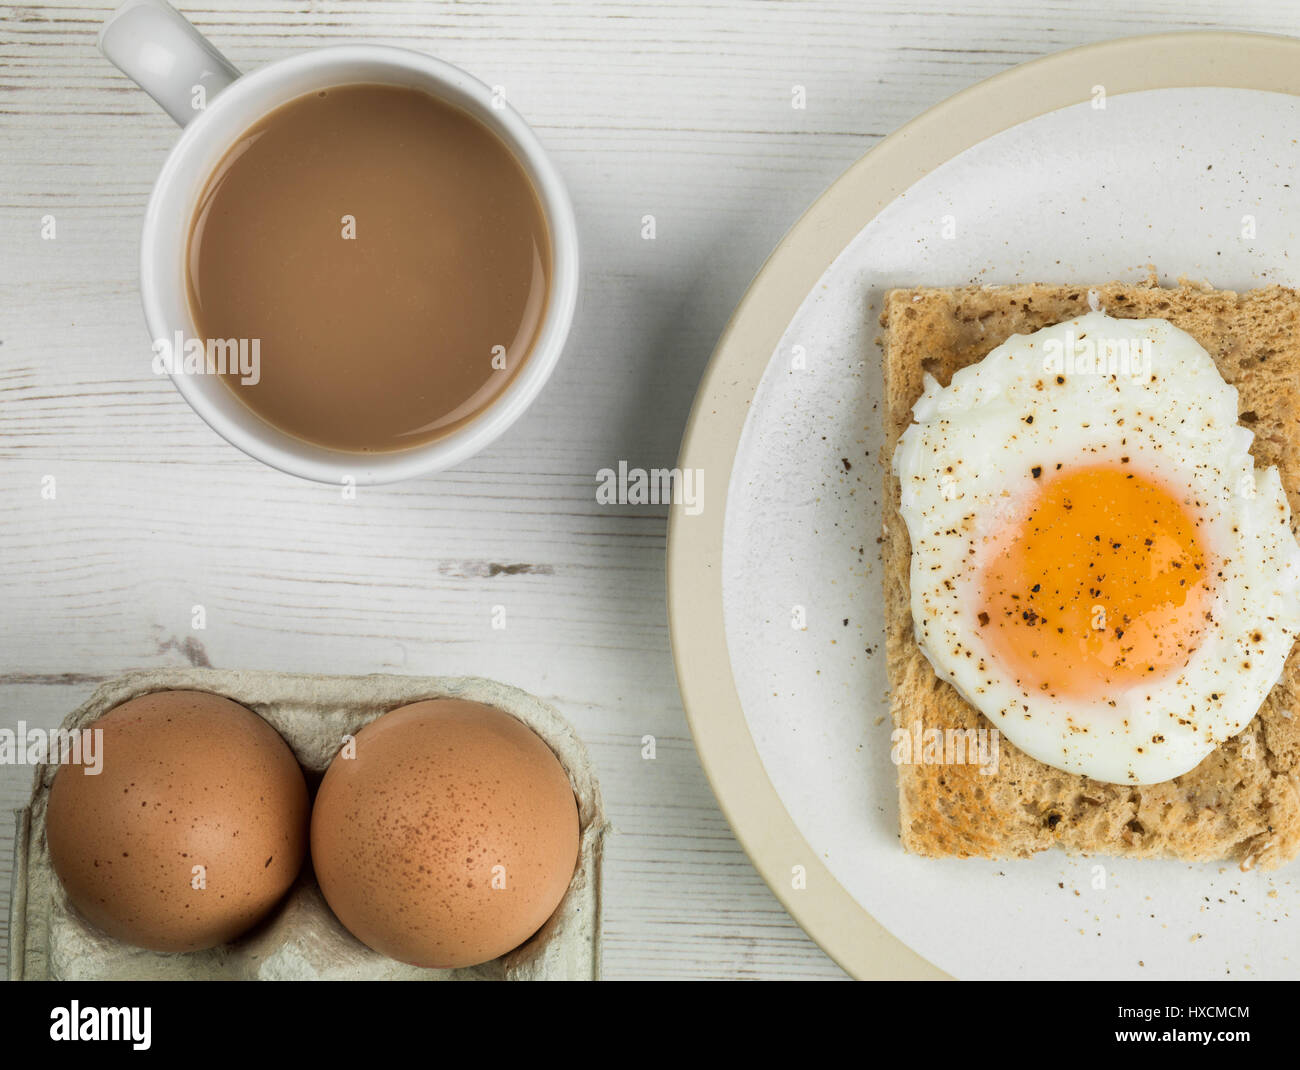 Flat Lay Composition And Tight Crop Of A Poached Egg On Toast, Sunny Side Up, Breakfast With a Mug of Tea or Coffee and Two Raw Eggs In Their Shells Stock Photo